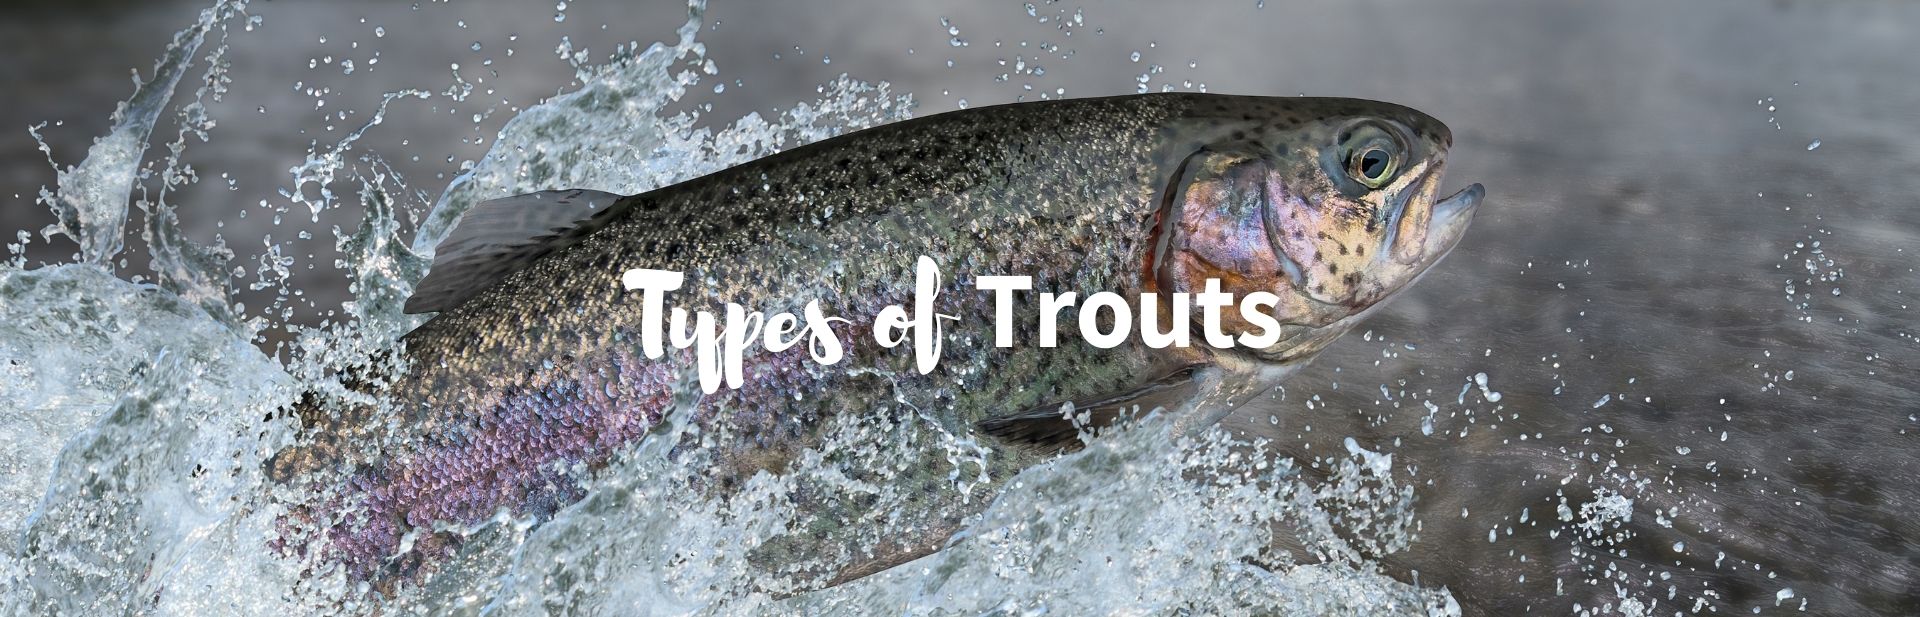 Types of Trout: All About Trout and Their Management